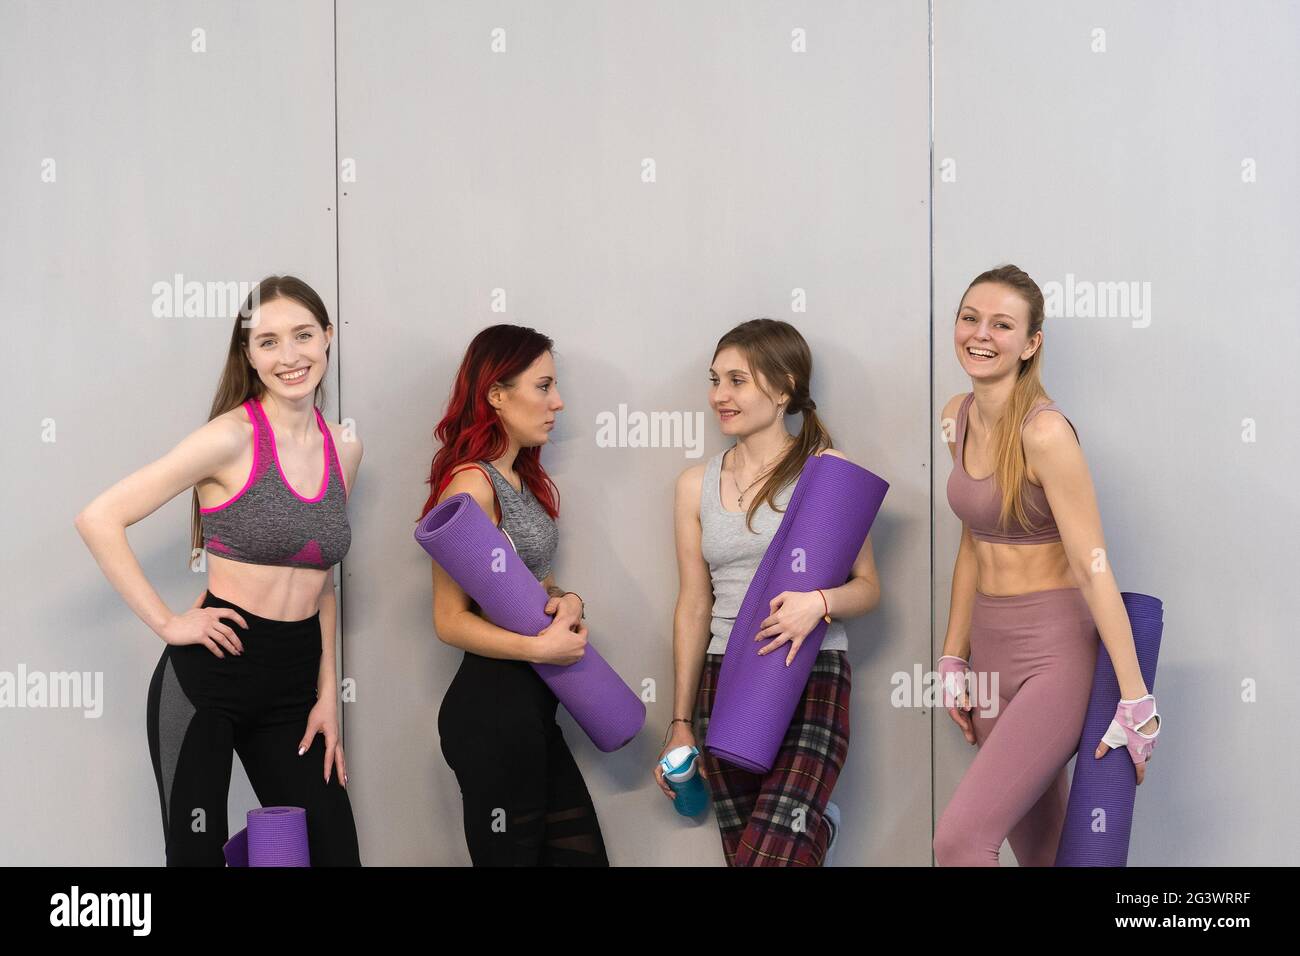 Athletic girls in sports out fits standing next to the wall holding a yoga mat, smiling on camera. Practicing in fitness or yoga Stock Photo